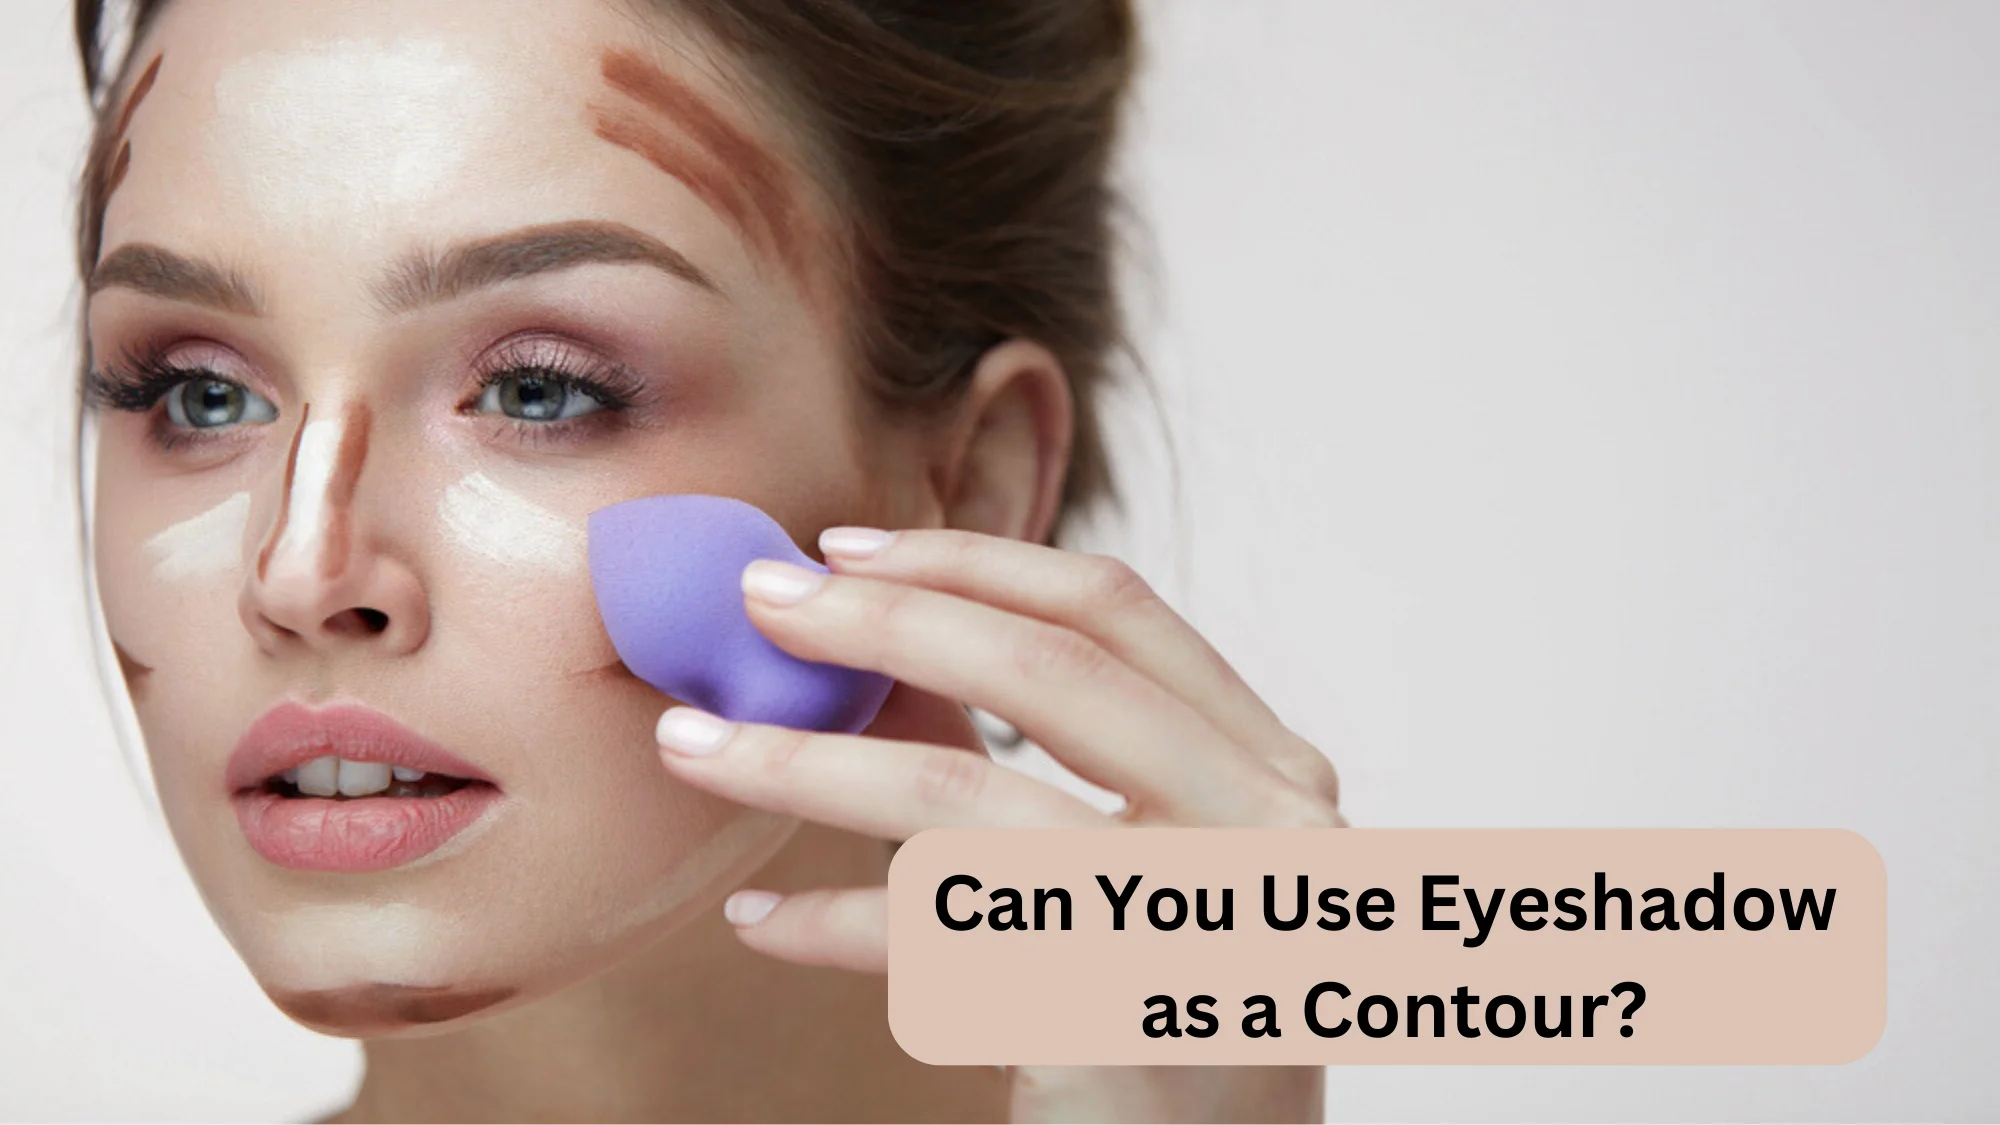 Can You Use Eyeshadow as a Contour?